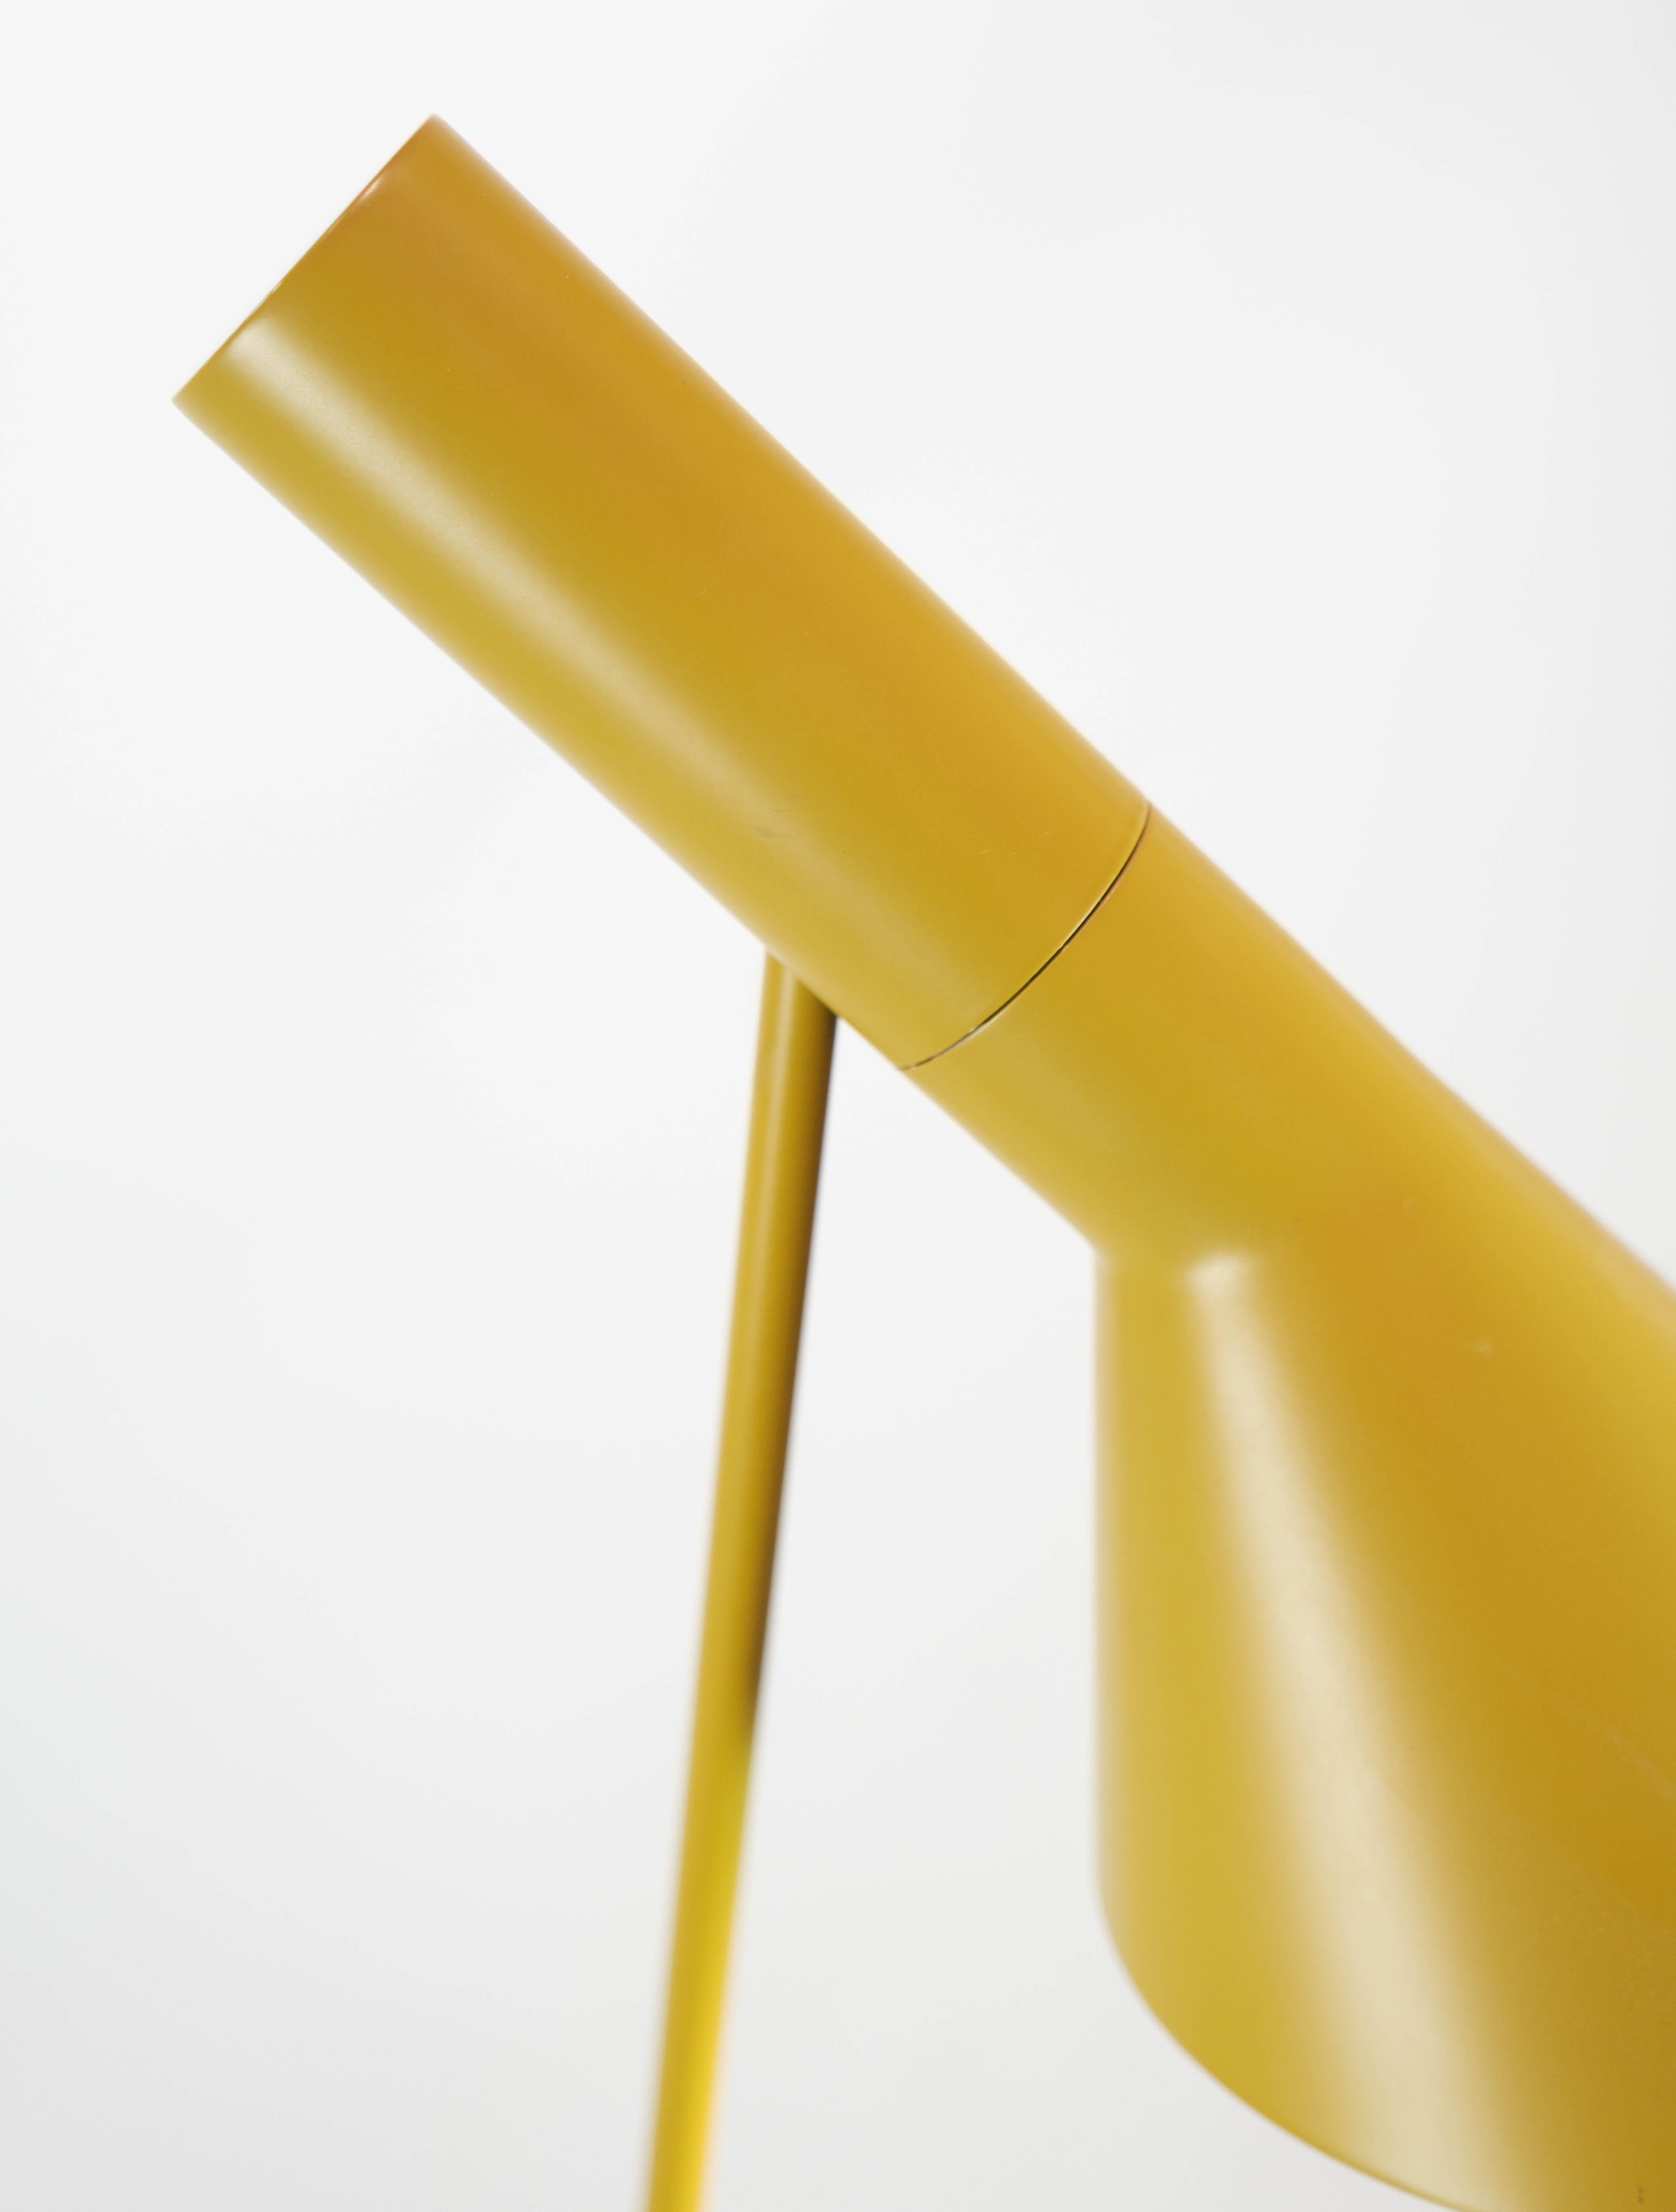 Yellow floor lamp designed by Arne Jacobsen and manufactured by Louis Poulsen. The lamp was originally designed for the SAS Royal Hotel in Copenhagen in 1957 for the hotel's design concept. The lamp here is the original made of steel with a tiltable